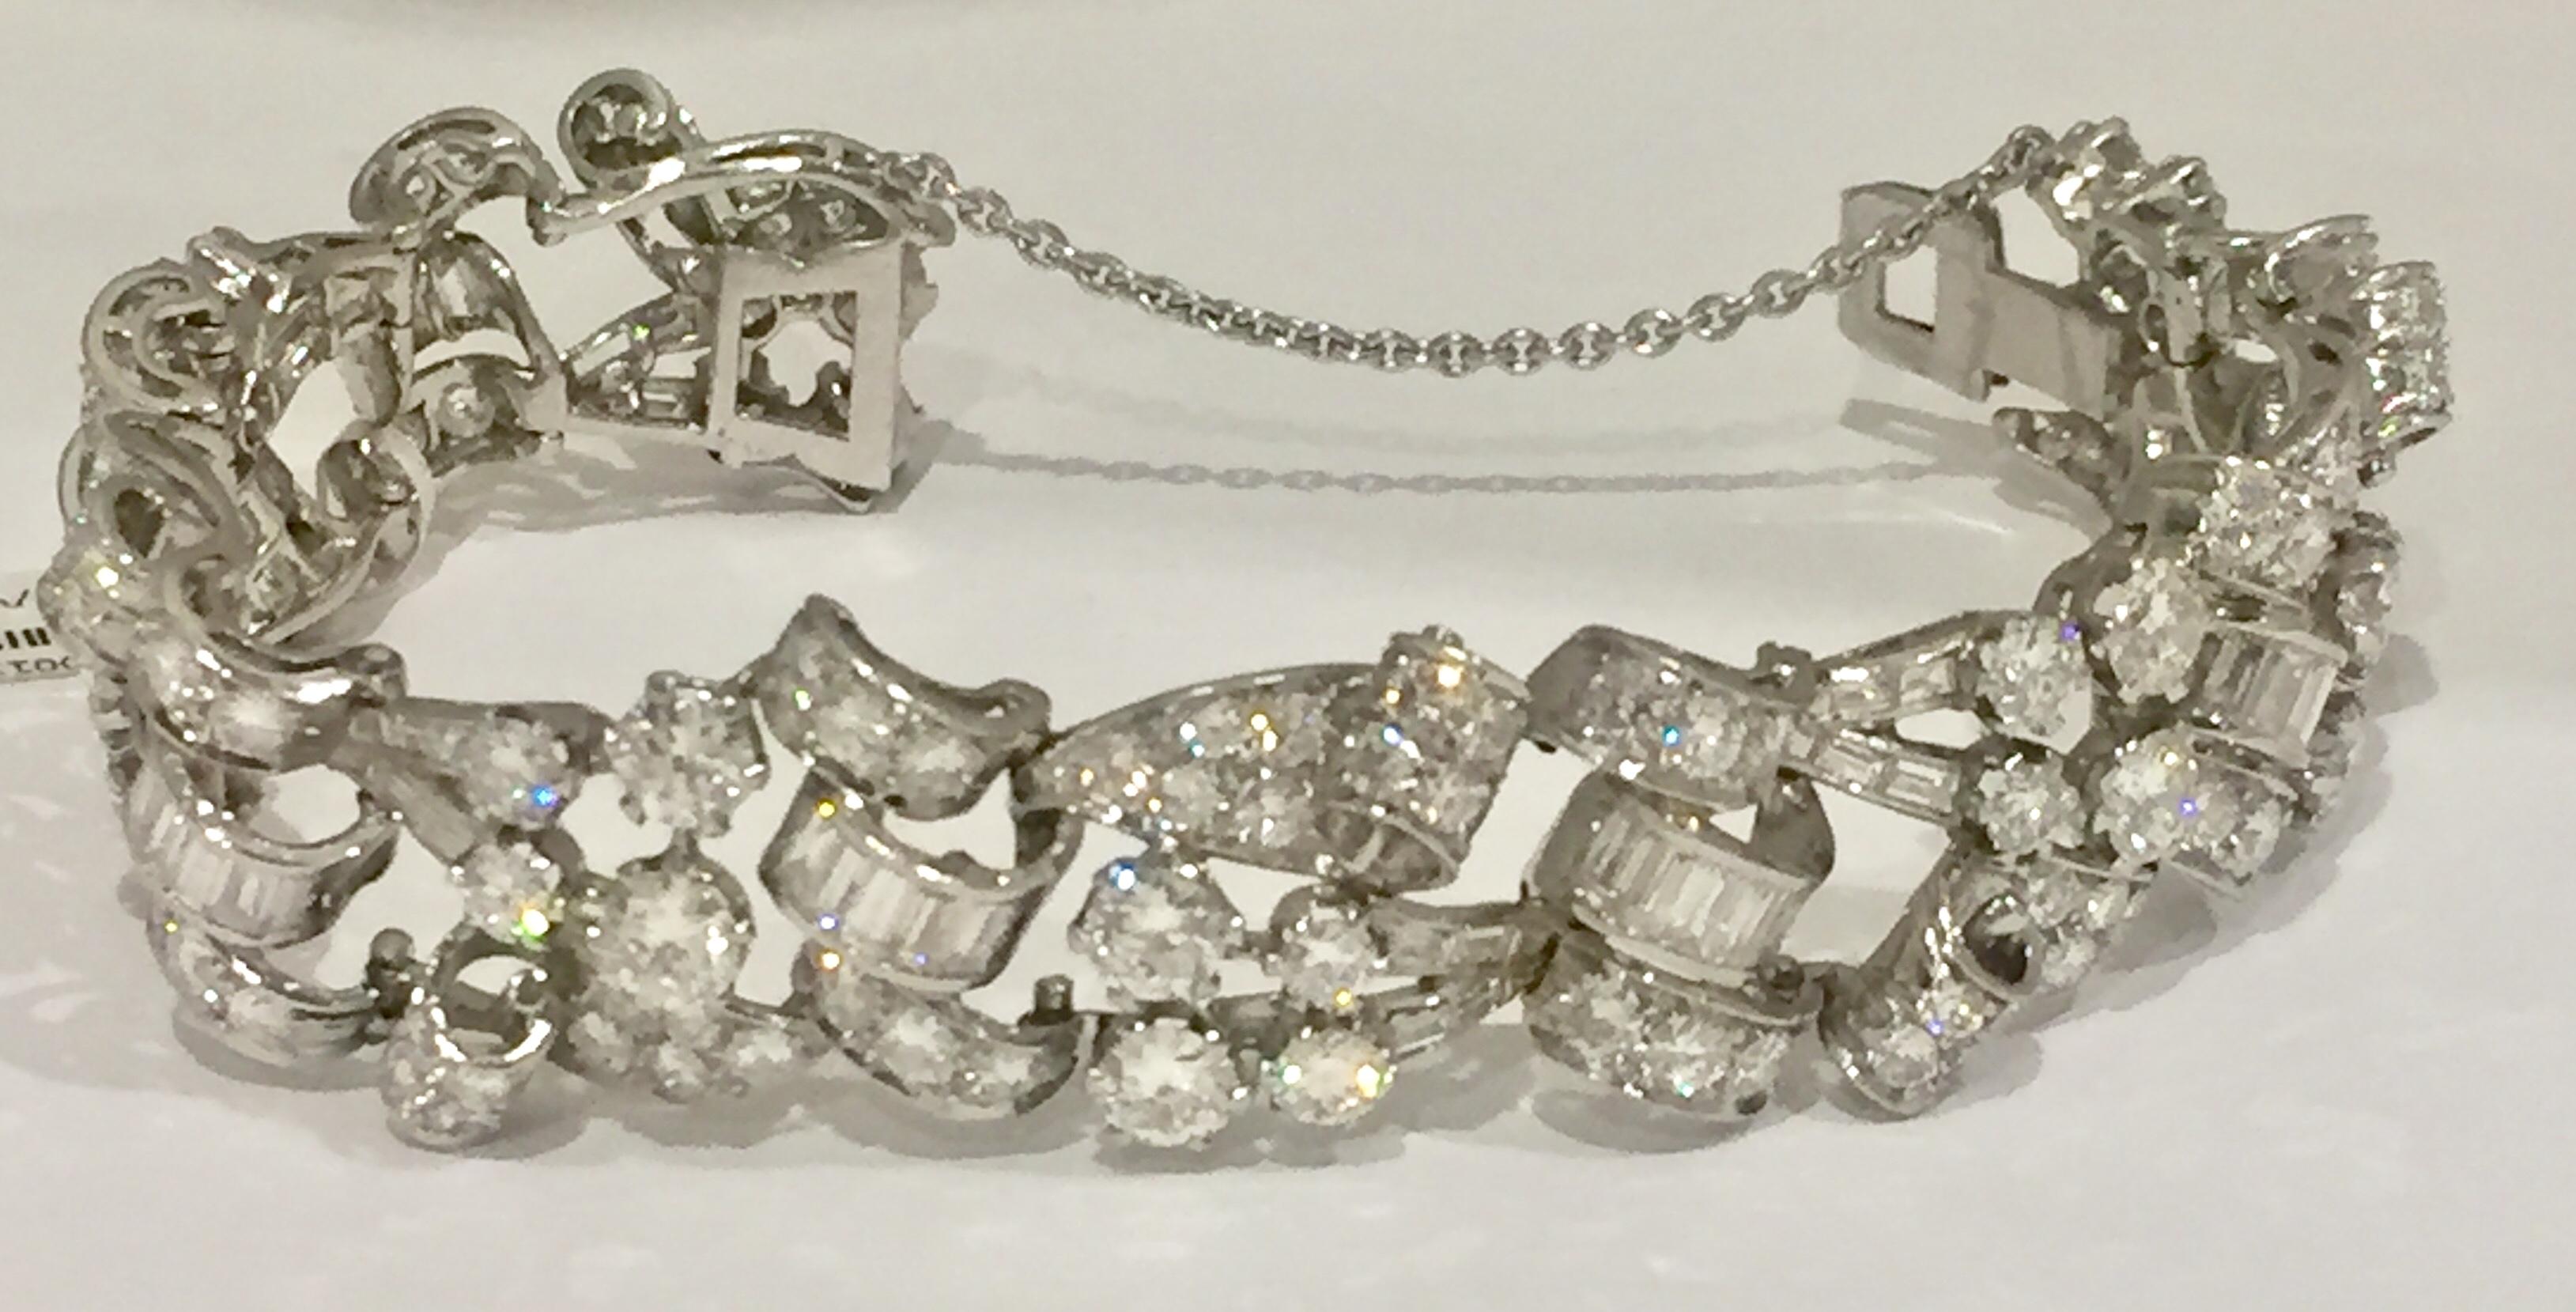 Very elegant and smooth Vintage Diamond Bracelet in Platinum. Set with 32 larger and 120 smaller brilliant cut diamonds and 72 baguette diamonds of a ca. 24 ct,  Wesselton, vs. 